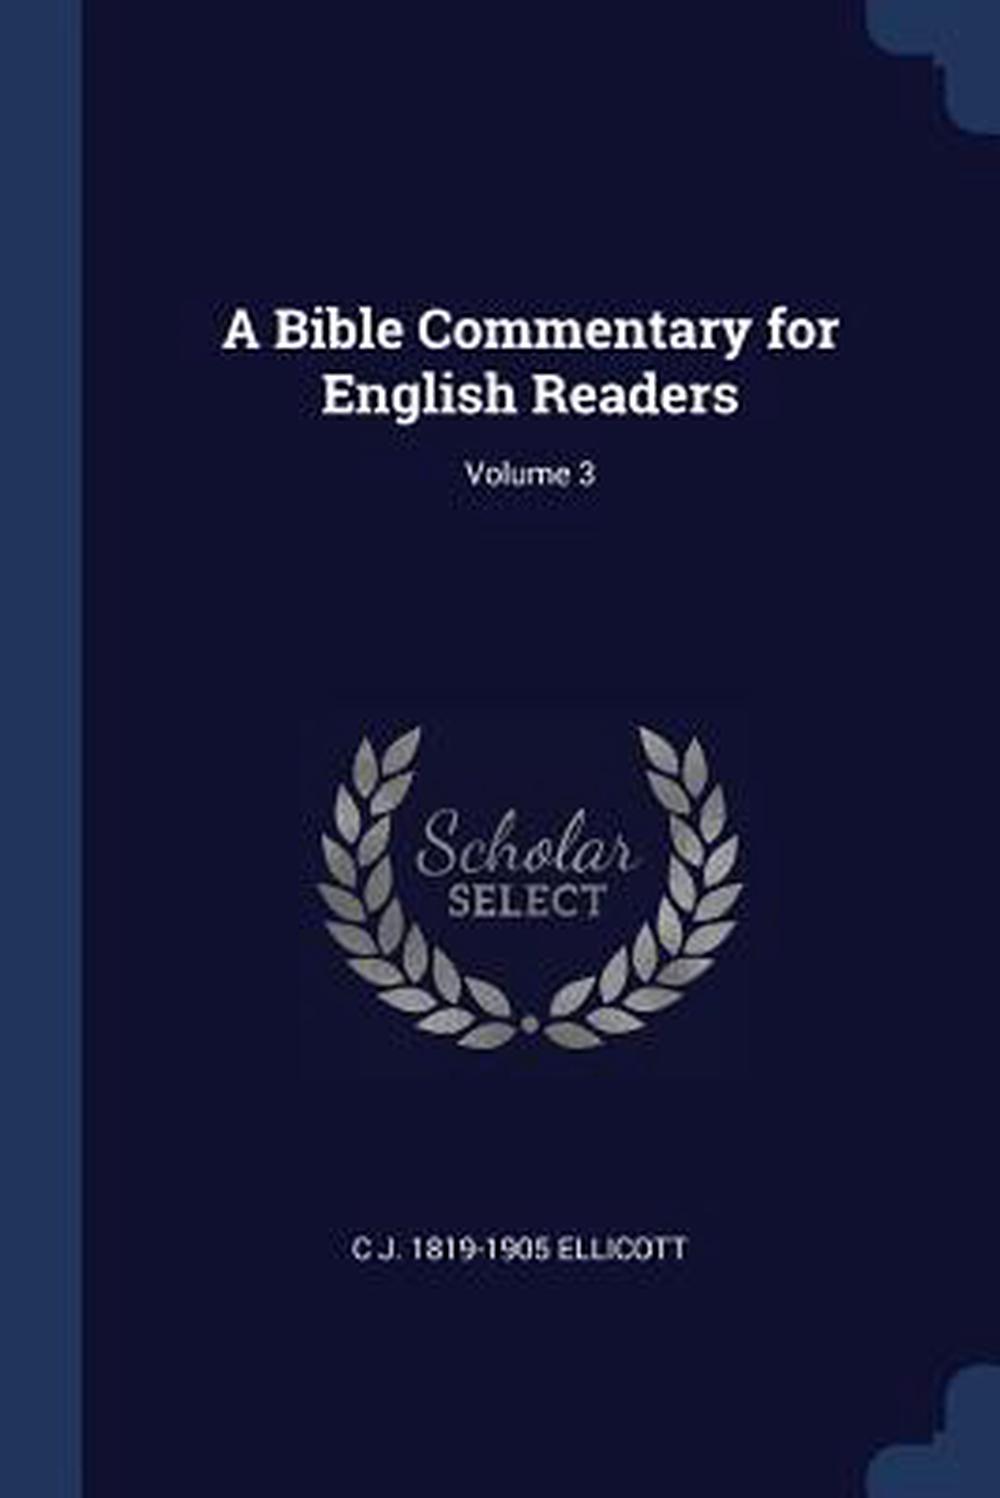 Bible Commentary For English Readers Volume 3 By Cj 1819 1905 Ellicott Paperb Ebay